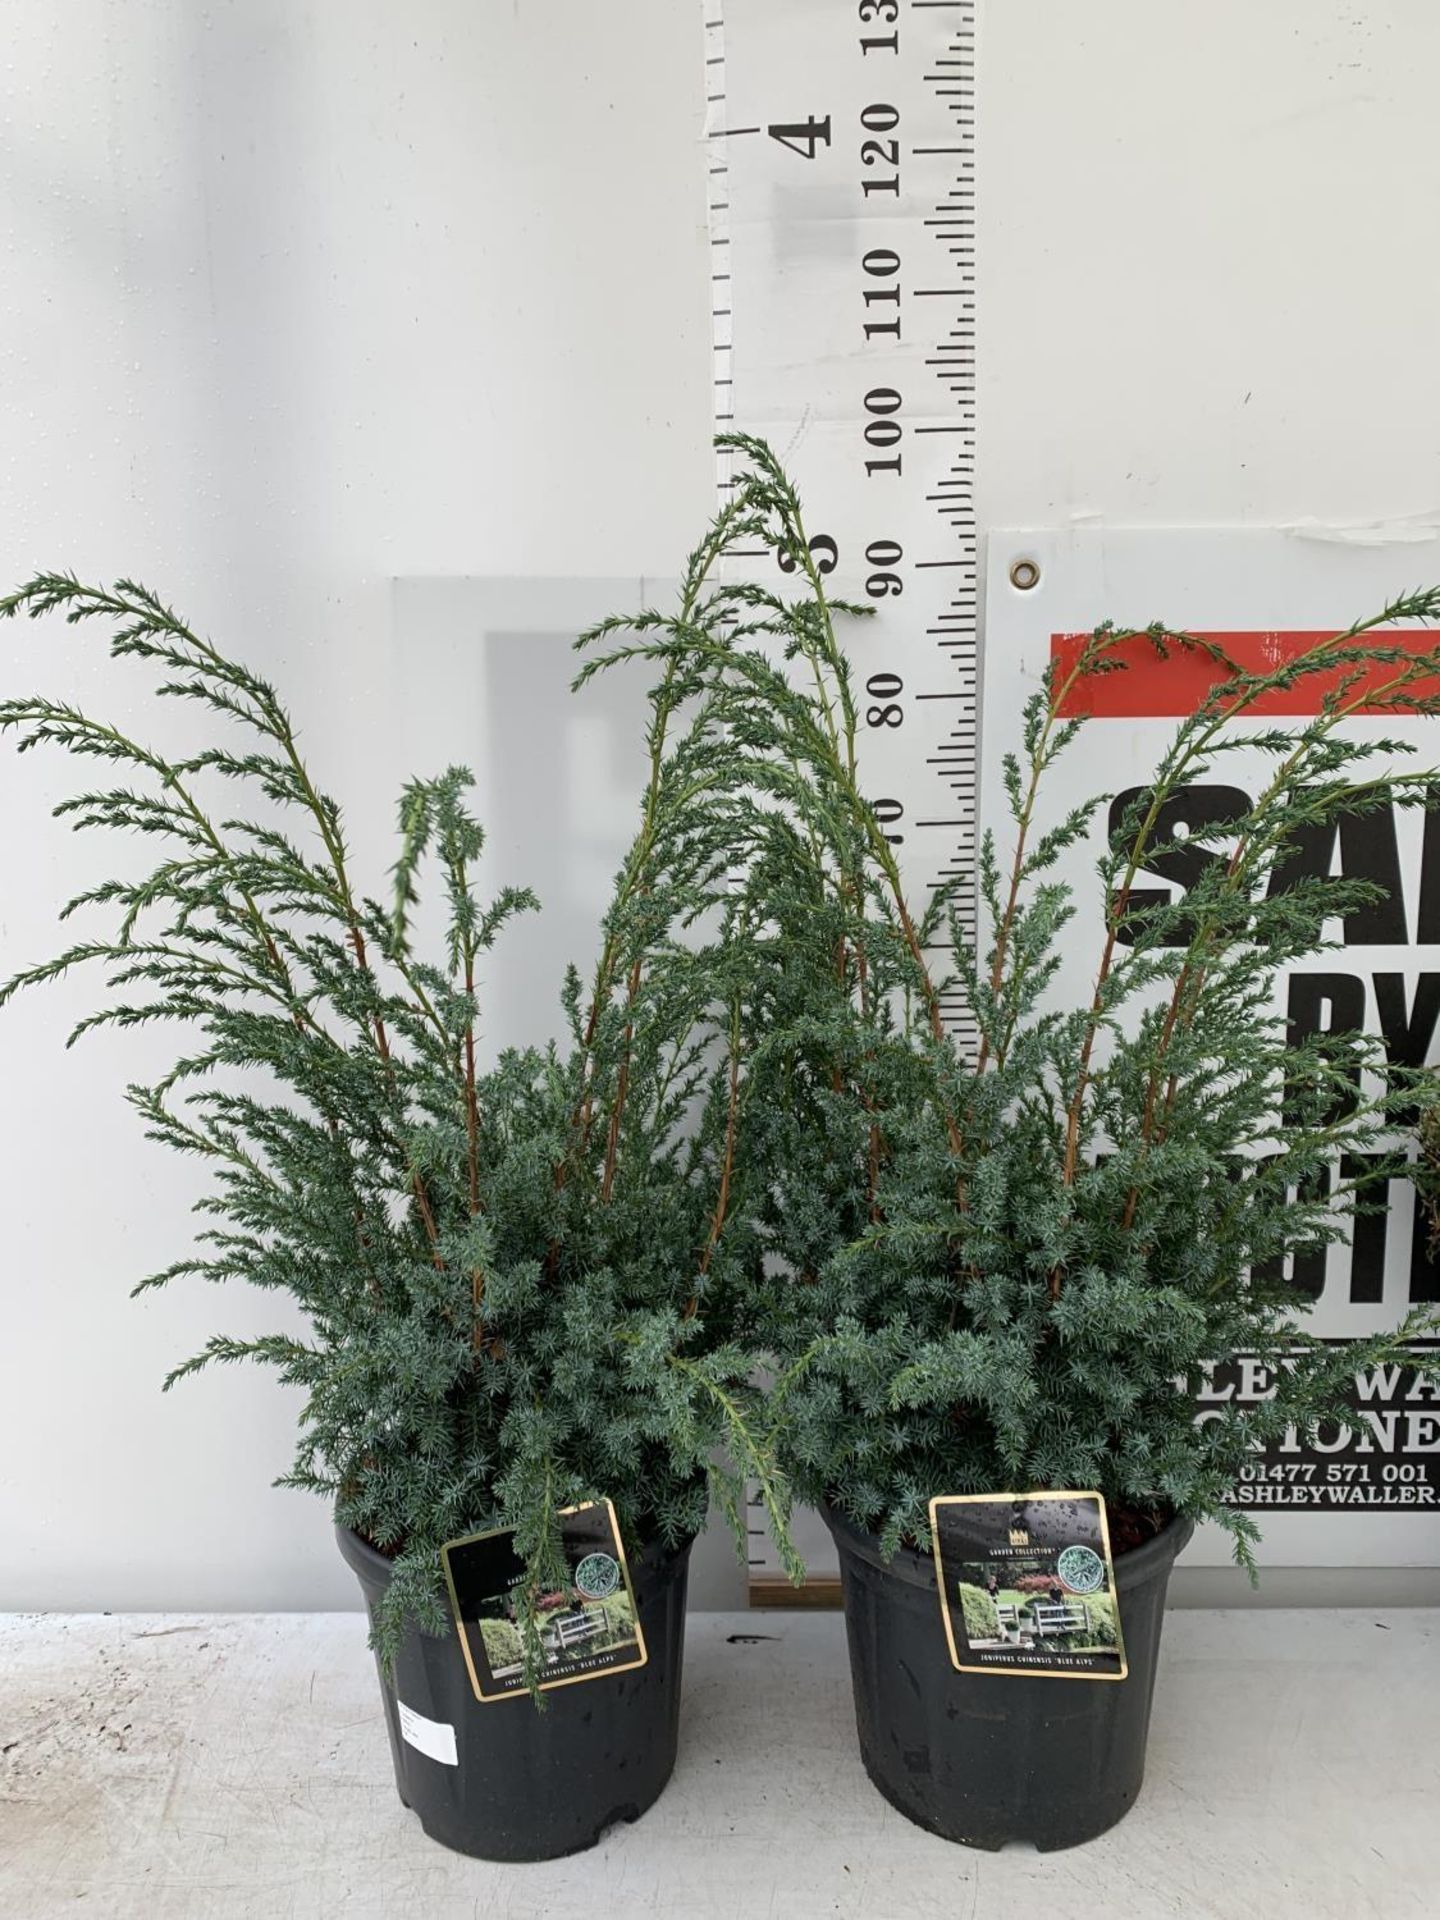 TWO JUNIPERUS CHINENSIS BLUE ALPS IN 7 LTR POTS A METRE IN HEIGHT PLUS VAT TO BE SOLD FOR THE TWO - Image 4 of 11